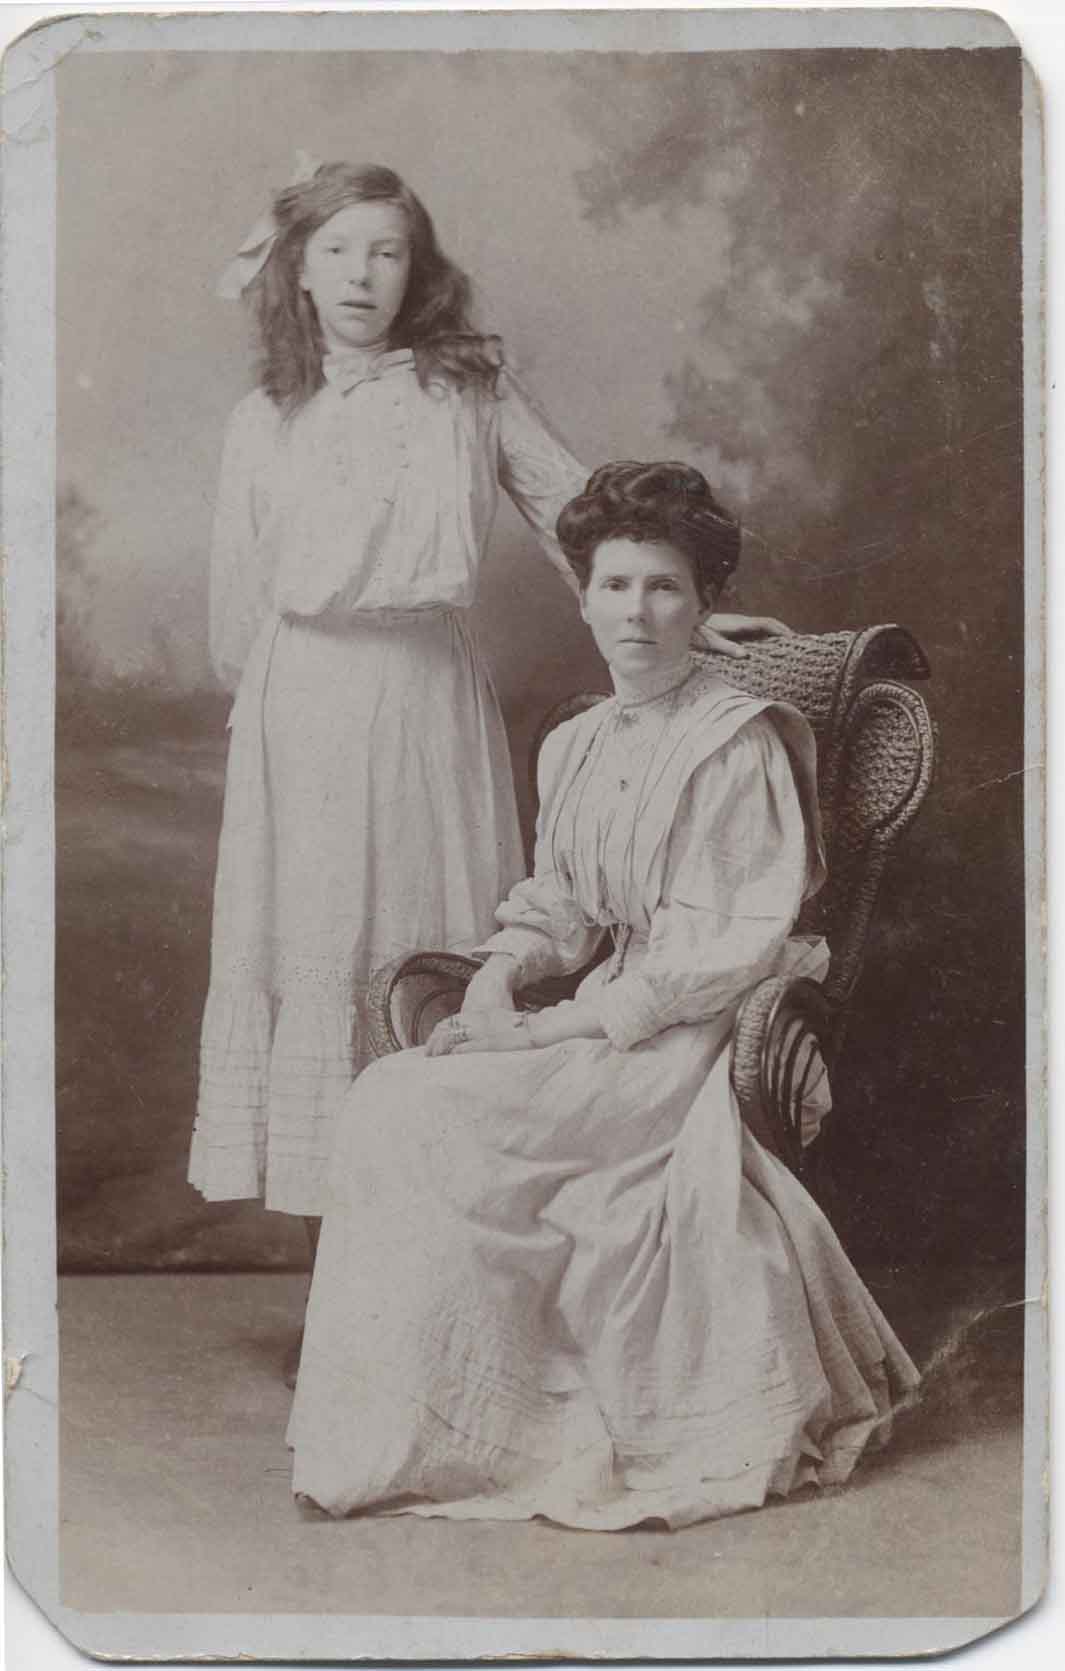 Annie Elizabeth (seated) and niece Olive STOKES in about 1905